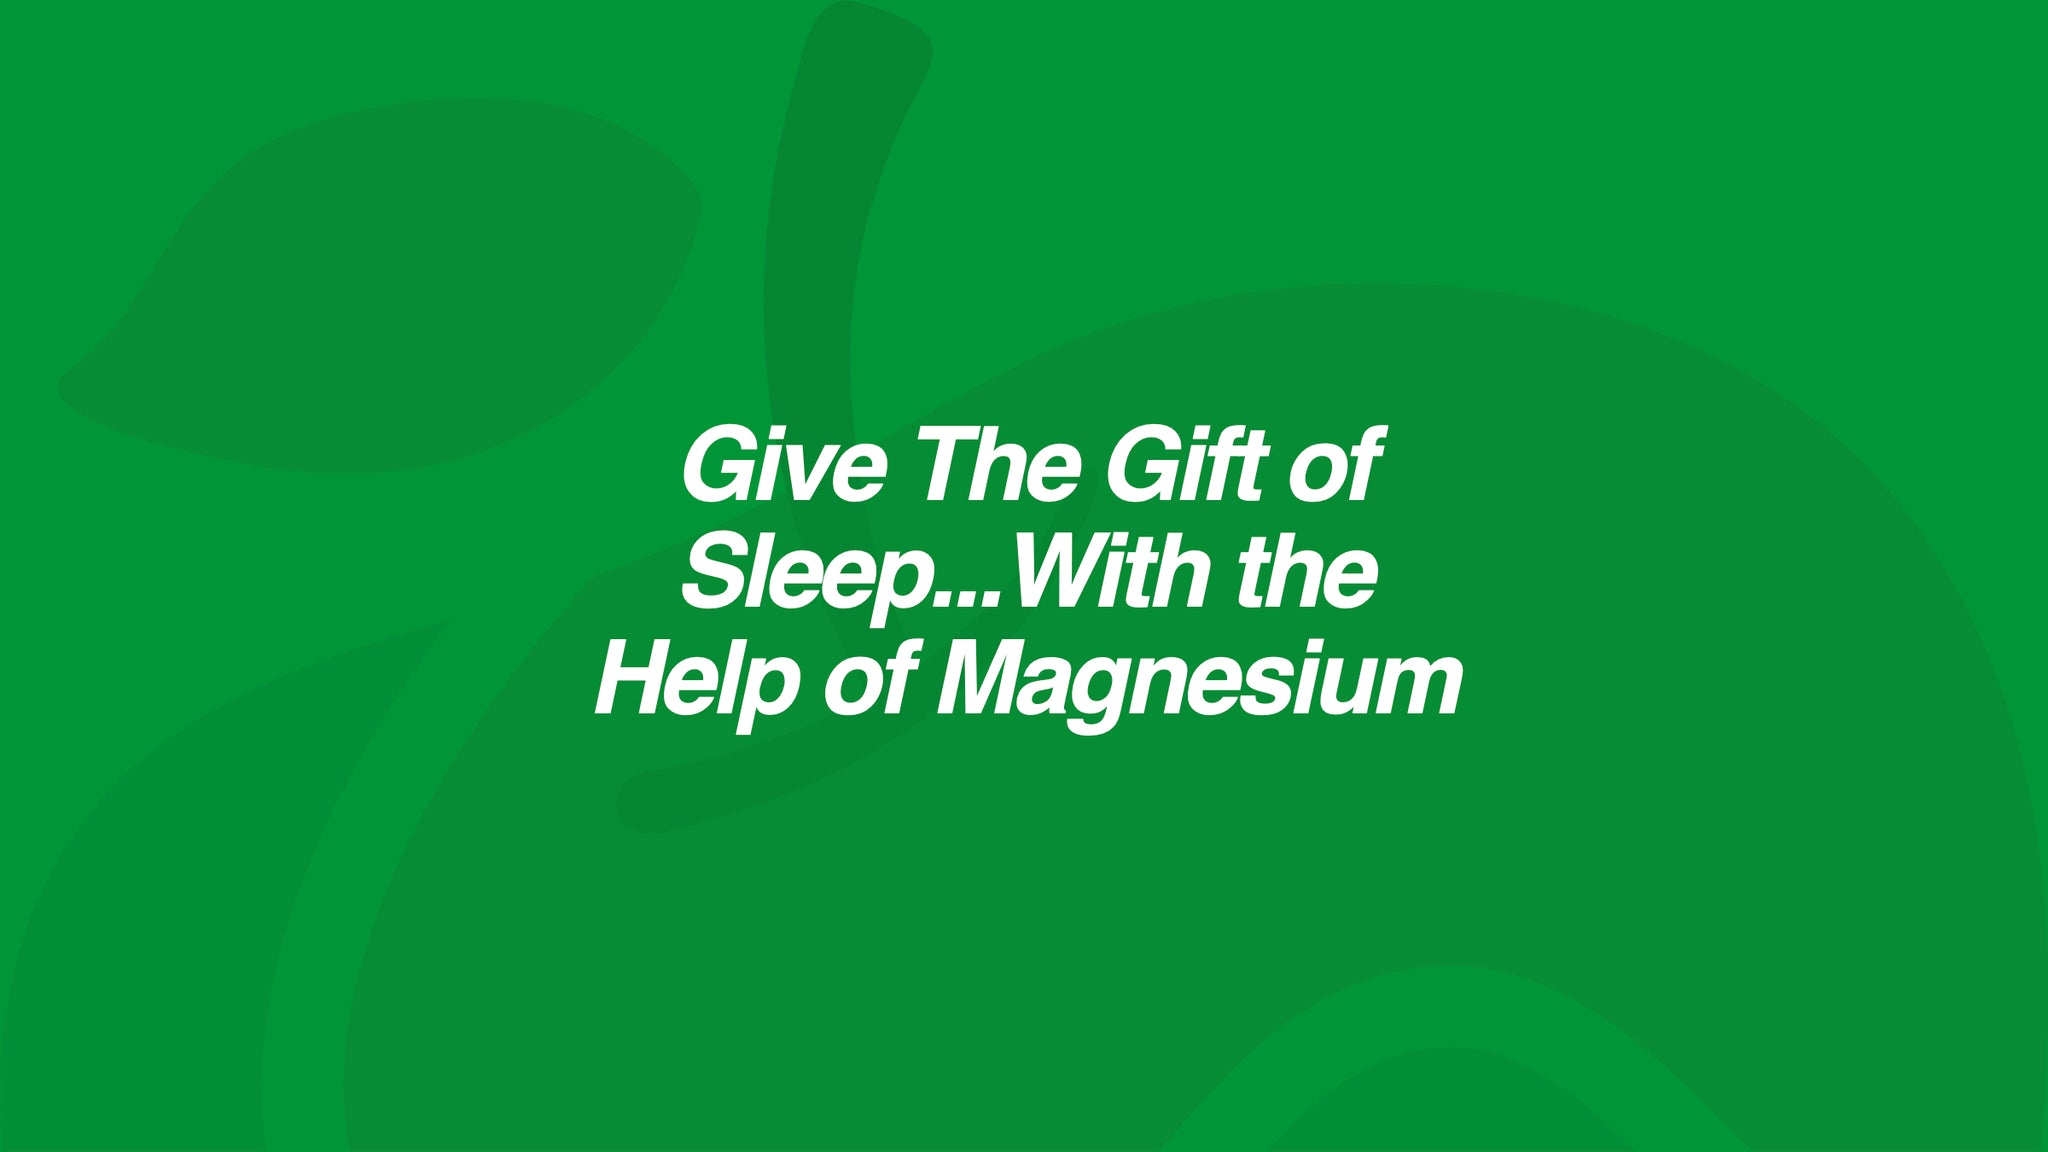 Give The Gift of Sleep...With the Help of Magnesium